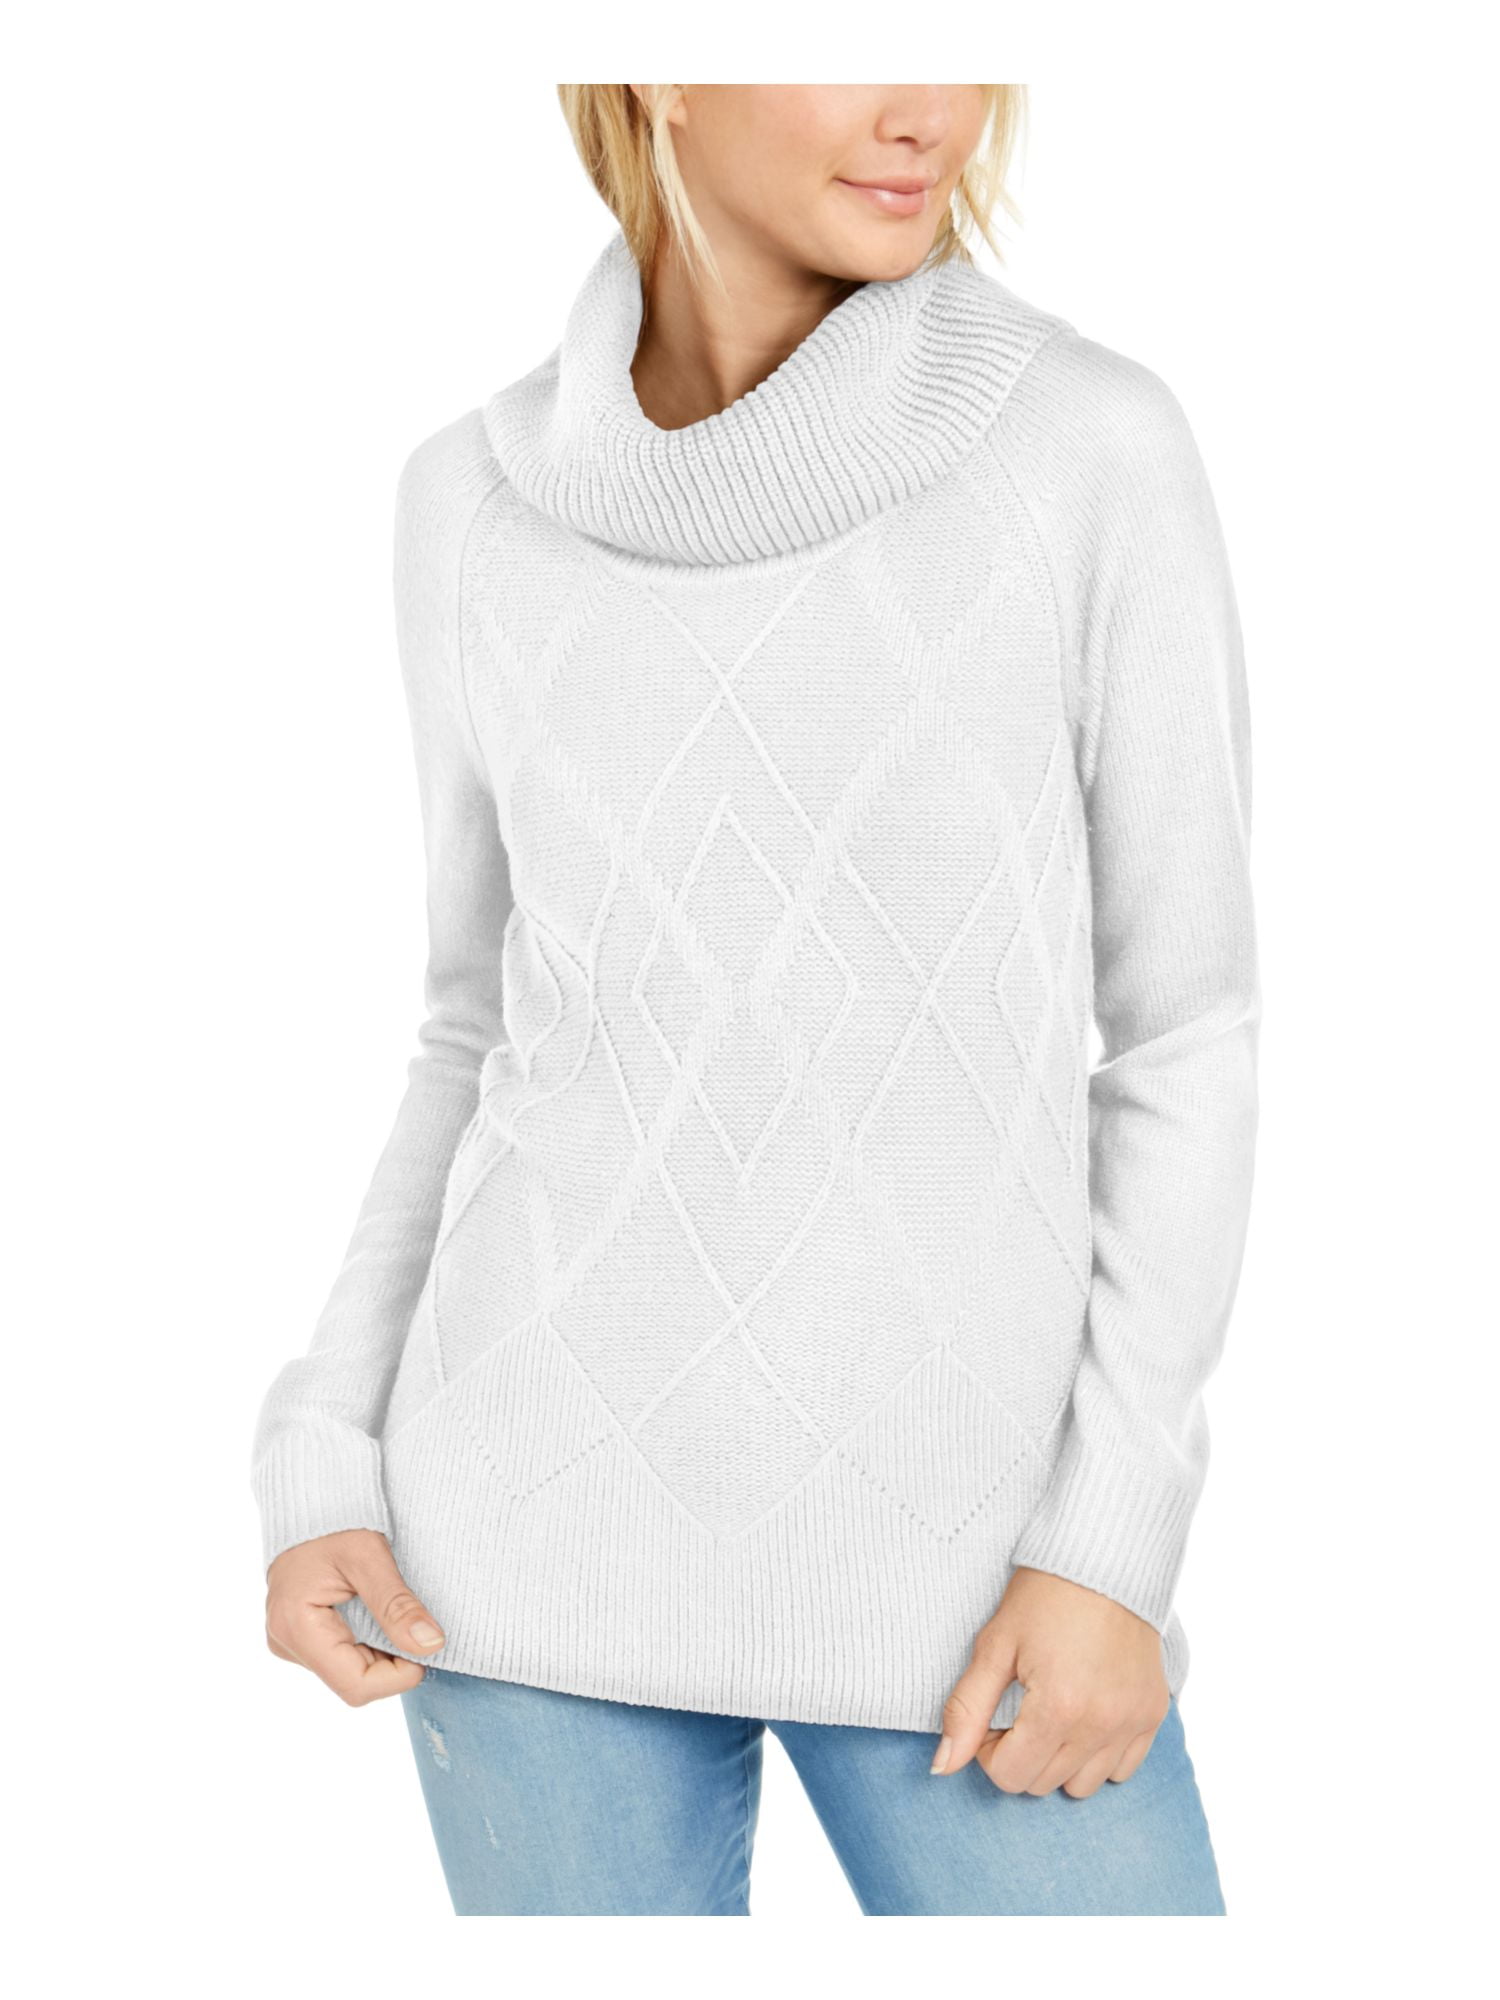 tommy hilfiger cowl neck sweater